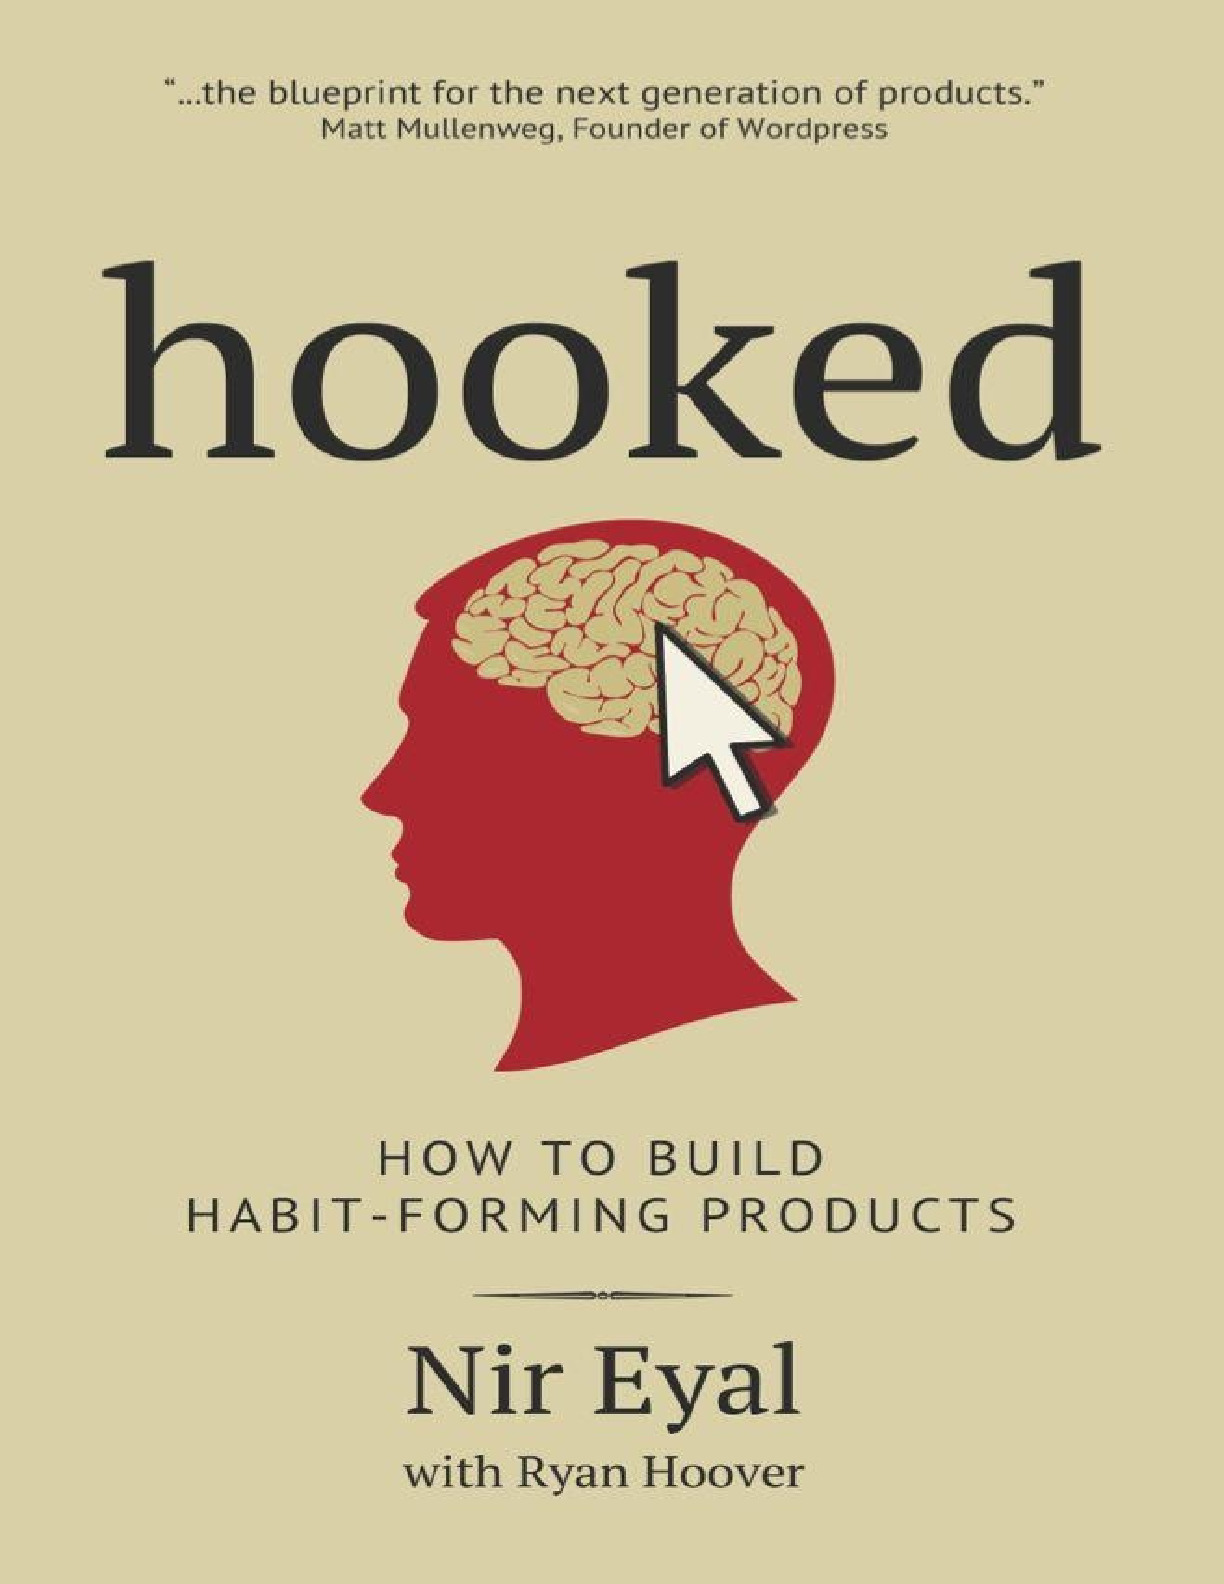 How to Build Habit-Forming Products